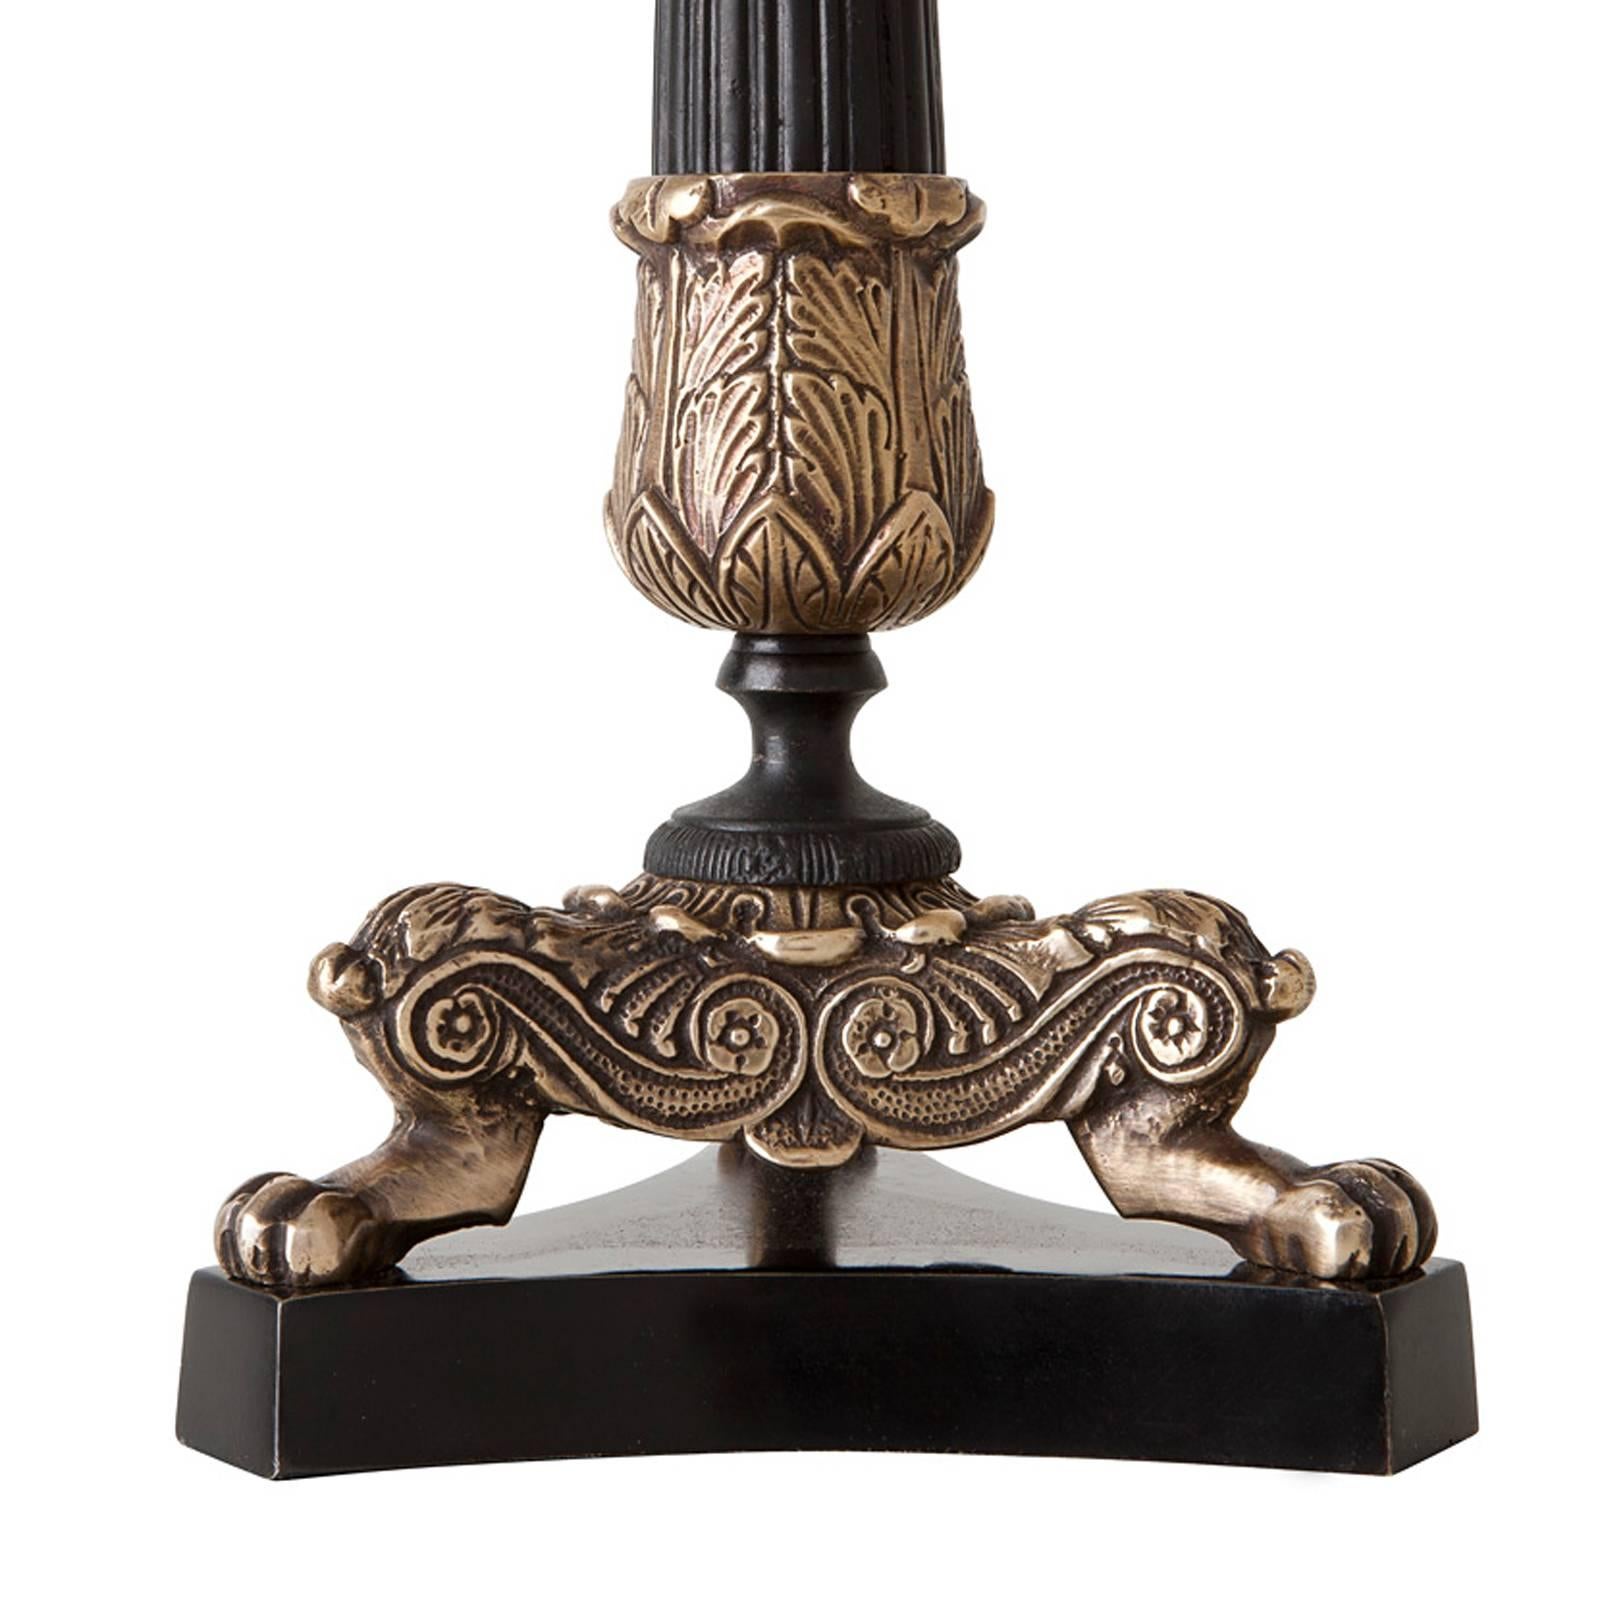 Candle holder chevalier with details in vintage brass
finish. Structure in black finish.
Also available in nickel finish. Structure in black finish.
Candle not included.
.